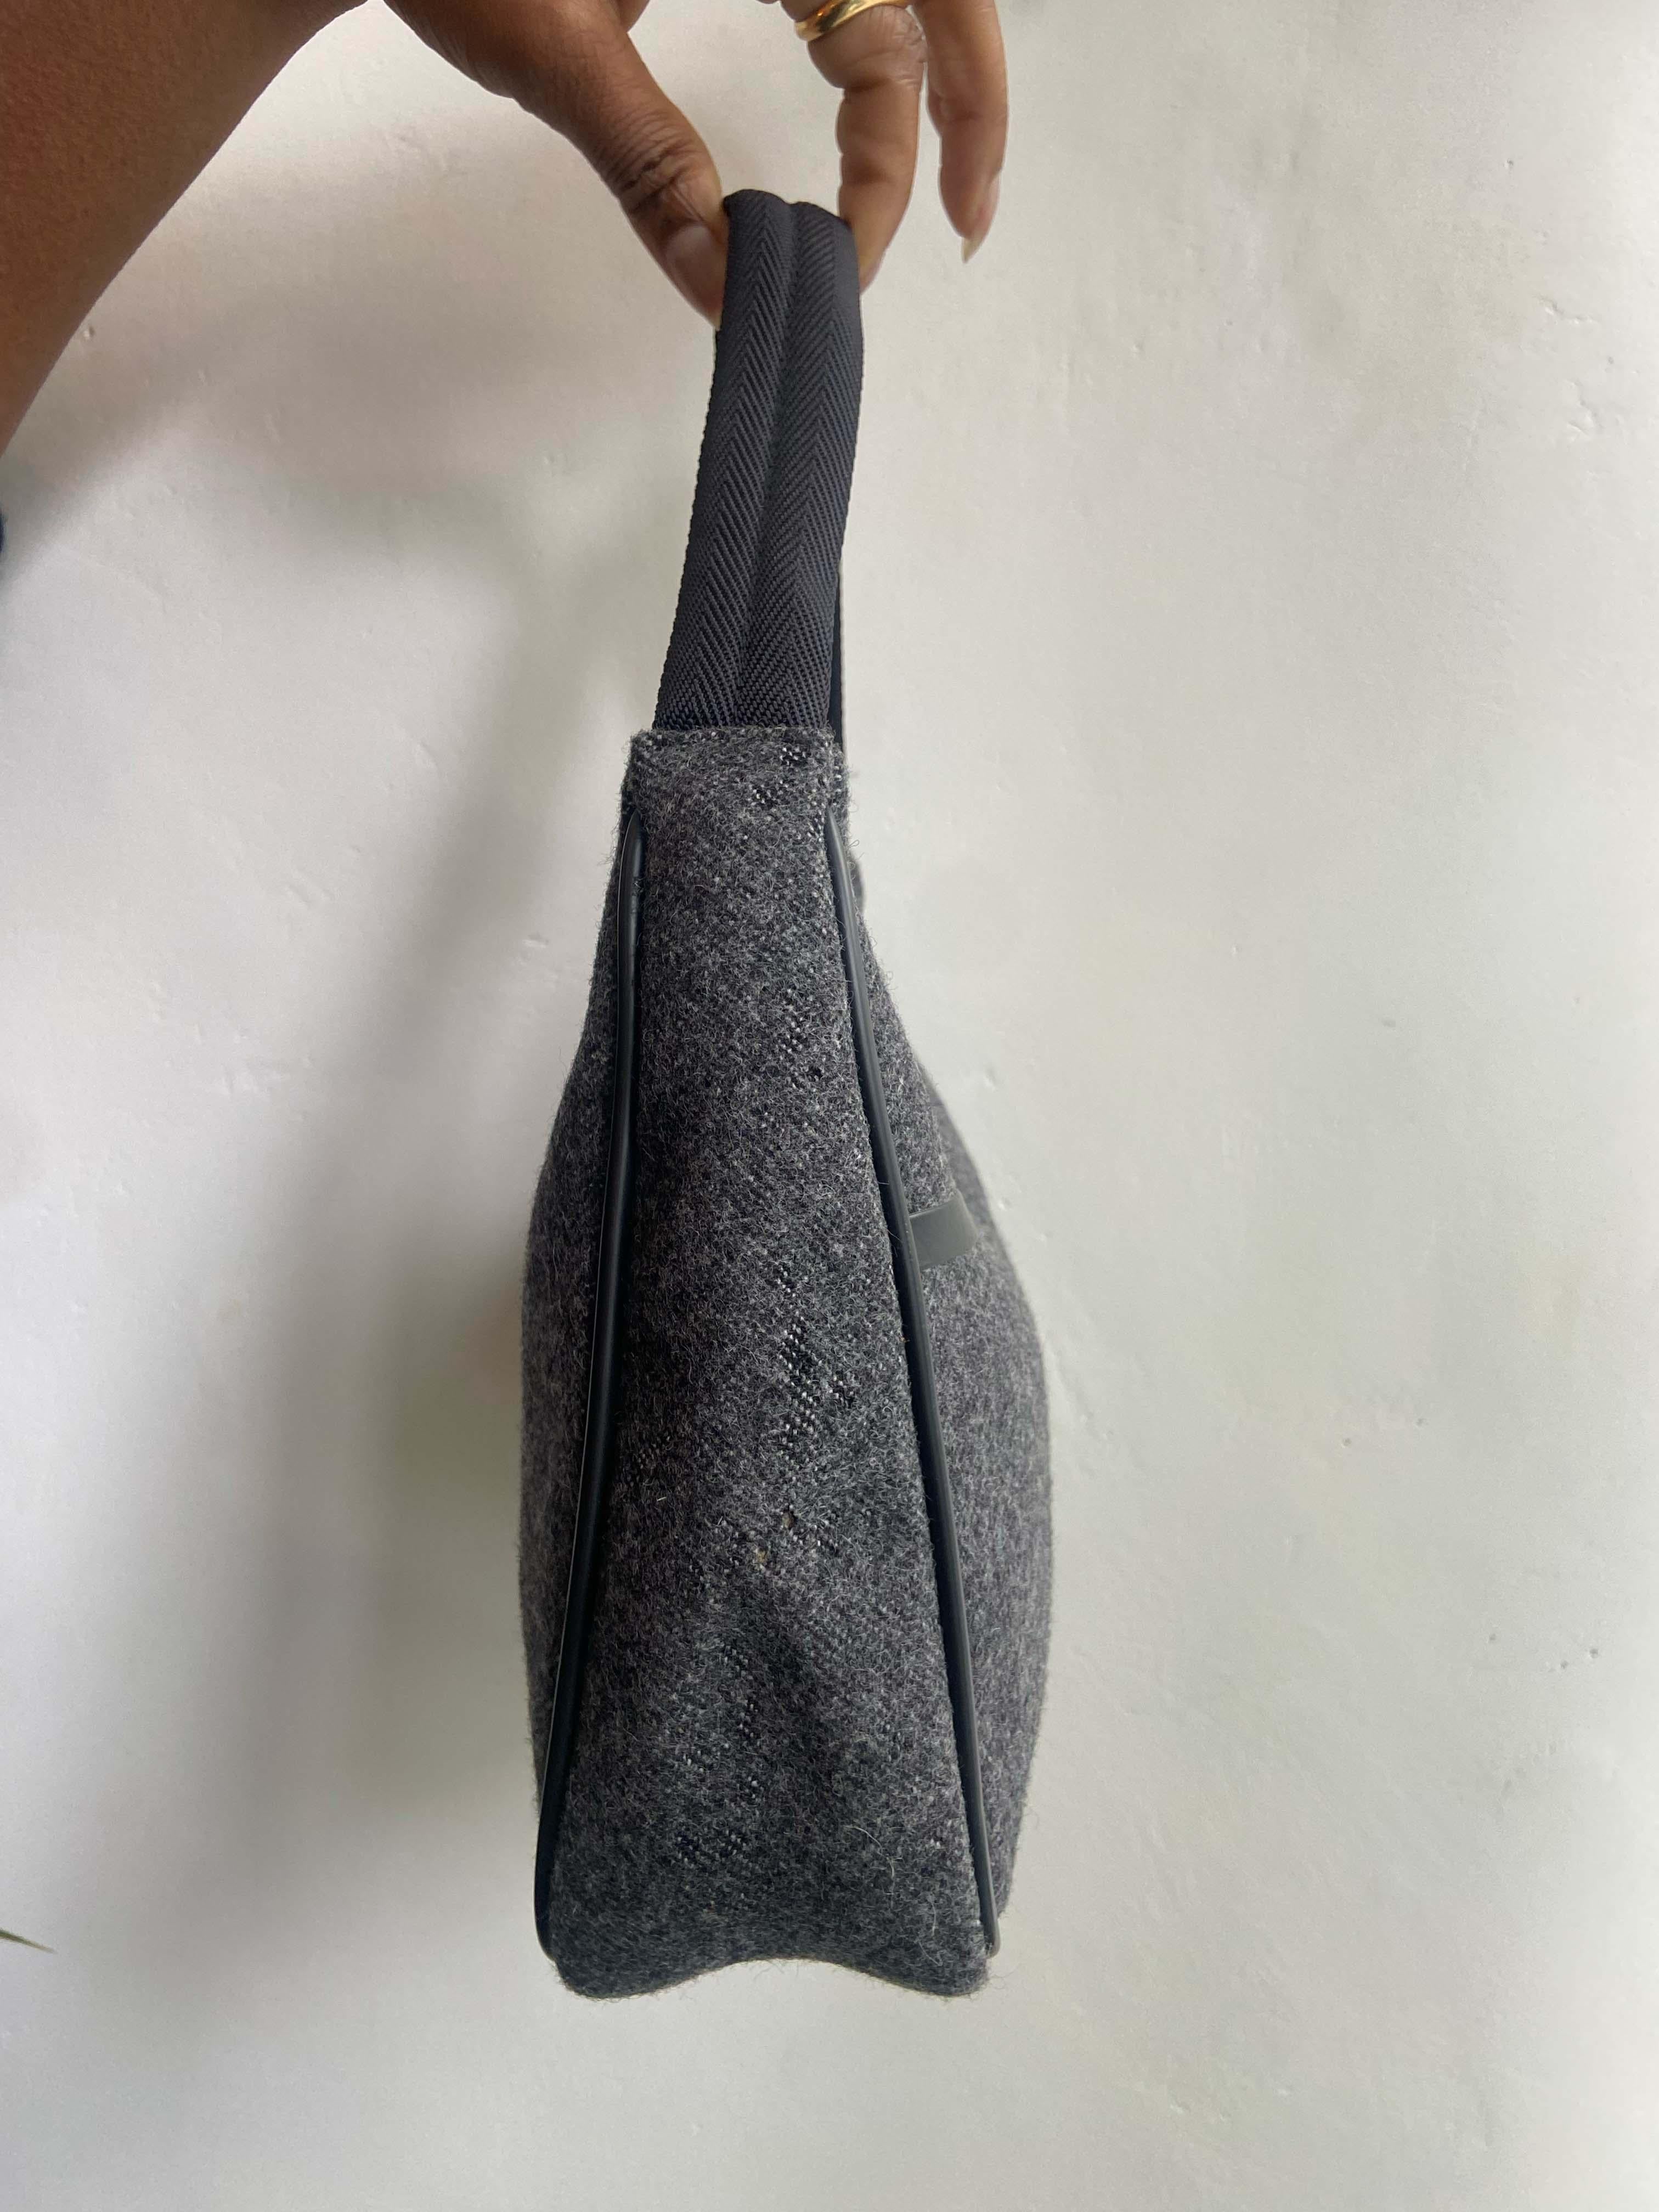 Prada 1999 Grey Wool Hobo Shoulder Bag In Excellent Condition For Sale In London, GB